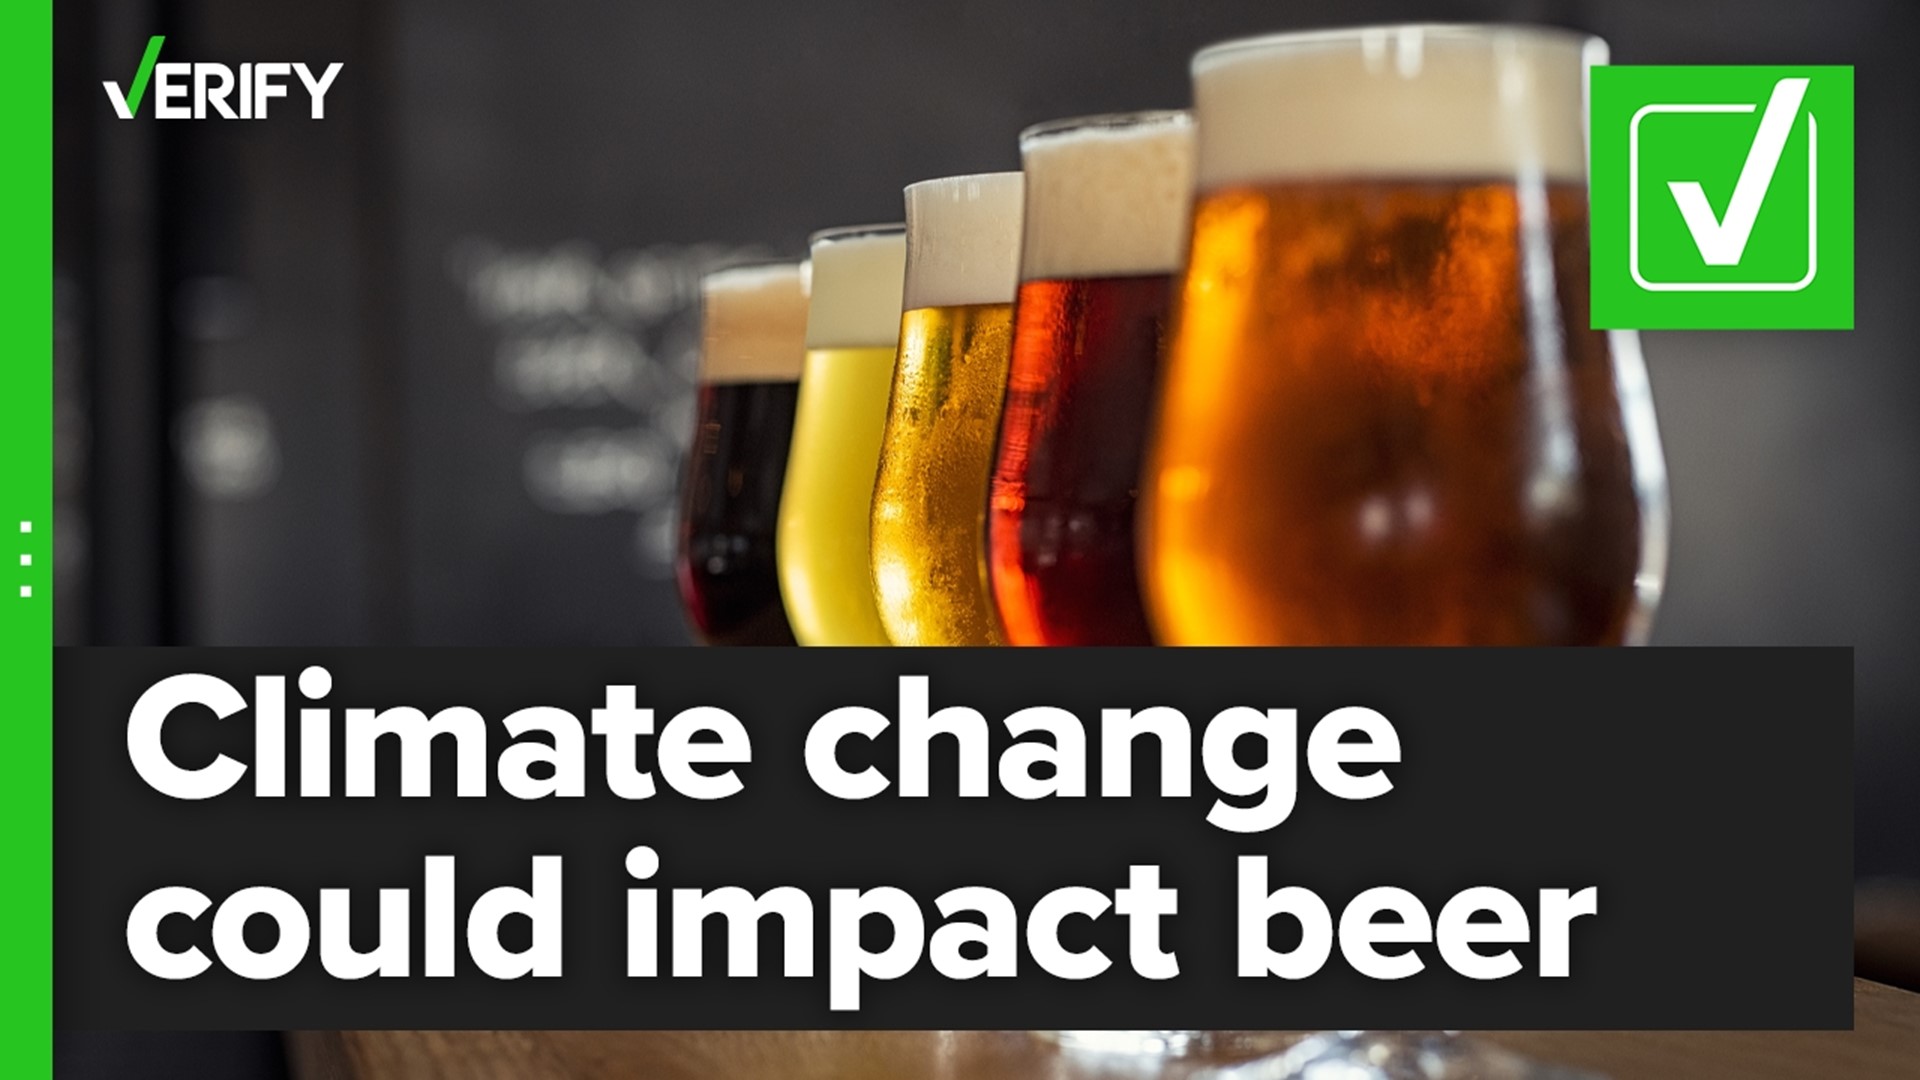 Water and barley are highly subject to climate change. And that impact could alter the taste of beer and lead to higher prices.